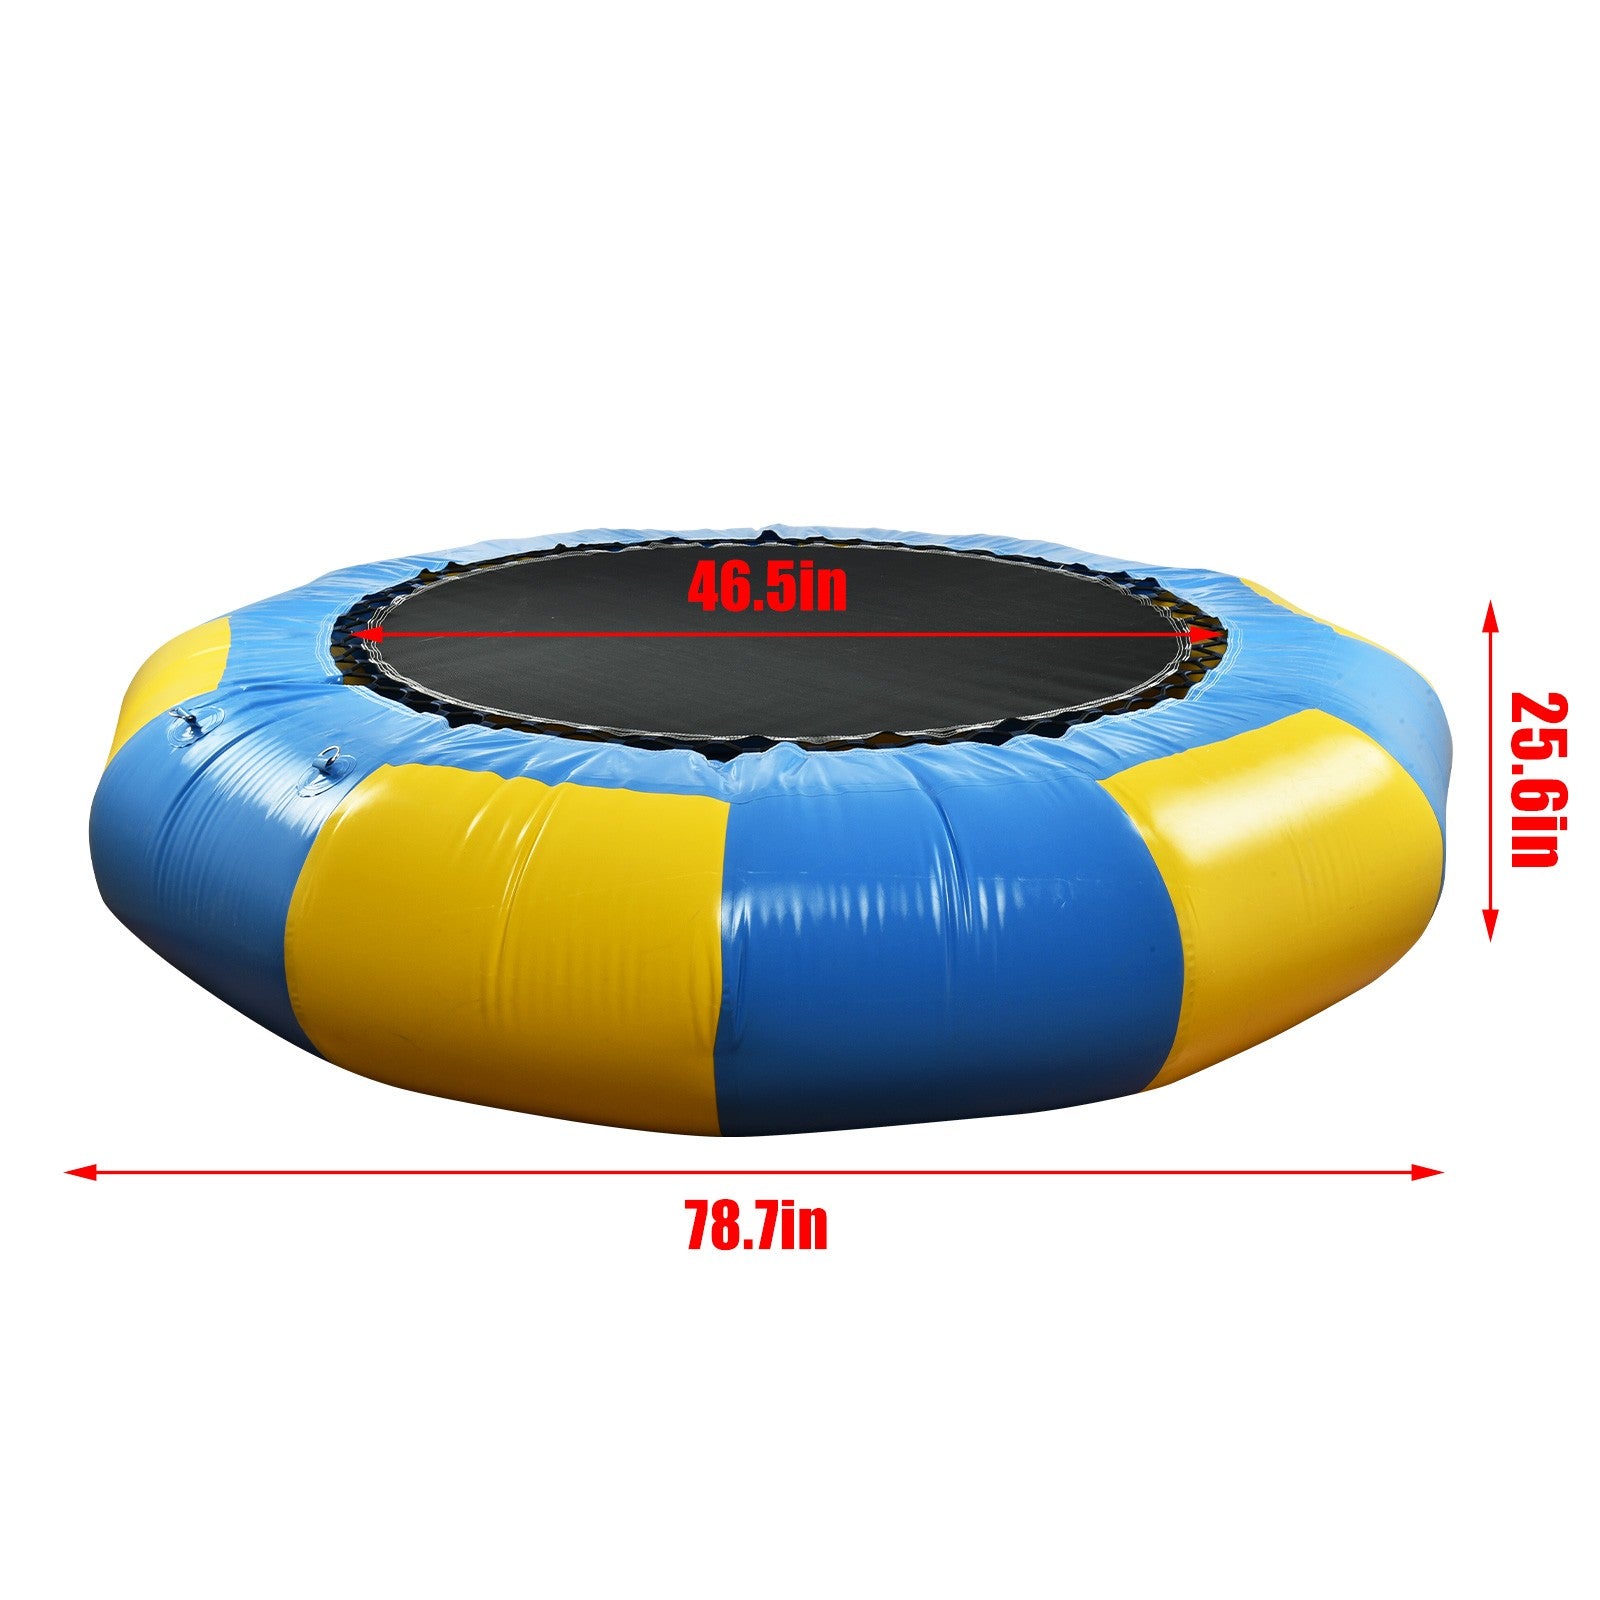 Summerella Bouncie, 6.5Ft Inflatable Trampoline Bounce Swim Platform For Water Sports